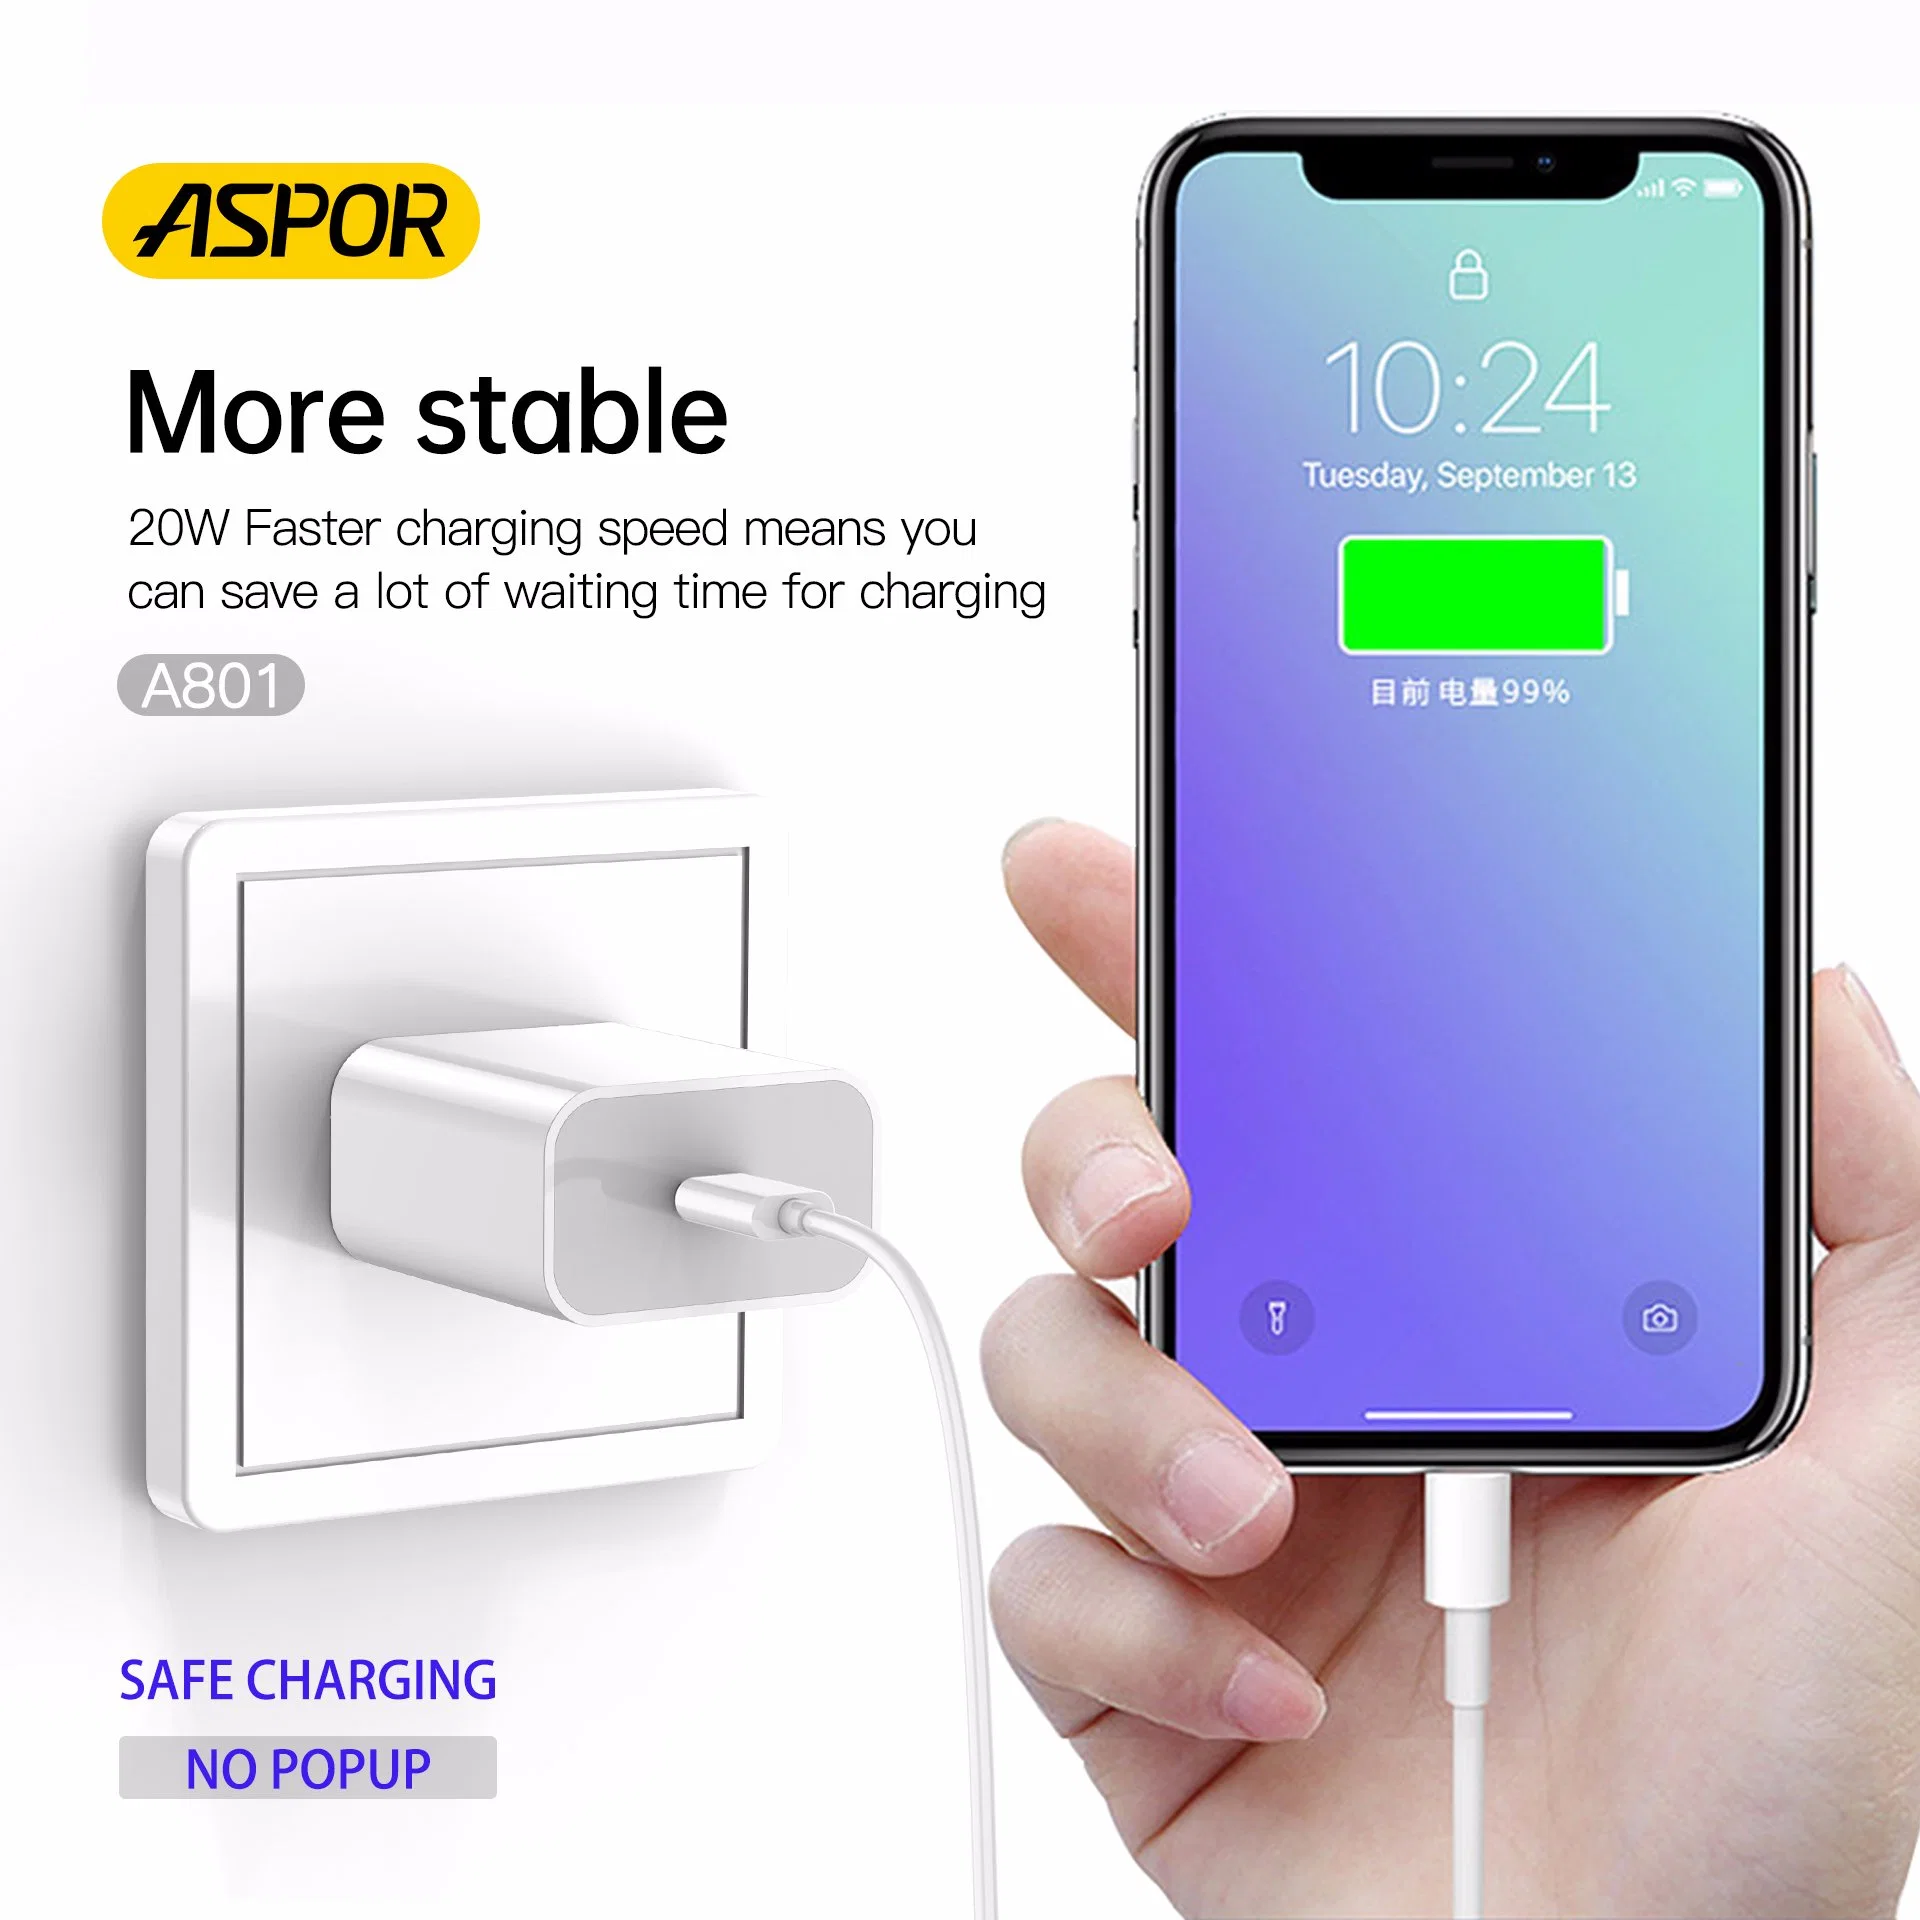 Aspor-New-20W-Fast-Charging-Home-Charger-Quick-Charging-for-Phone-White-Color-Home-Charger